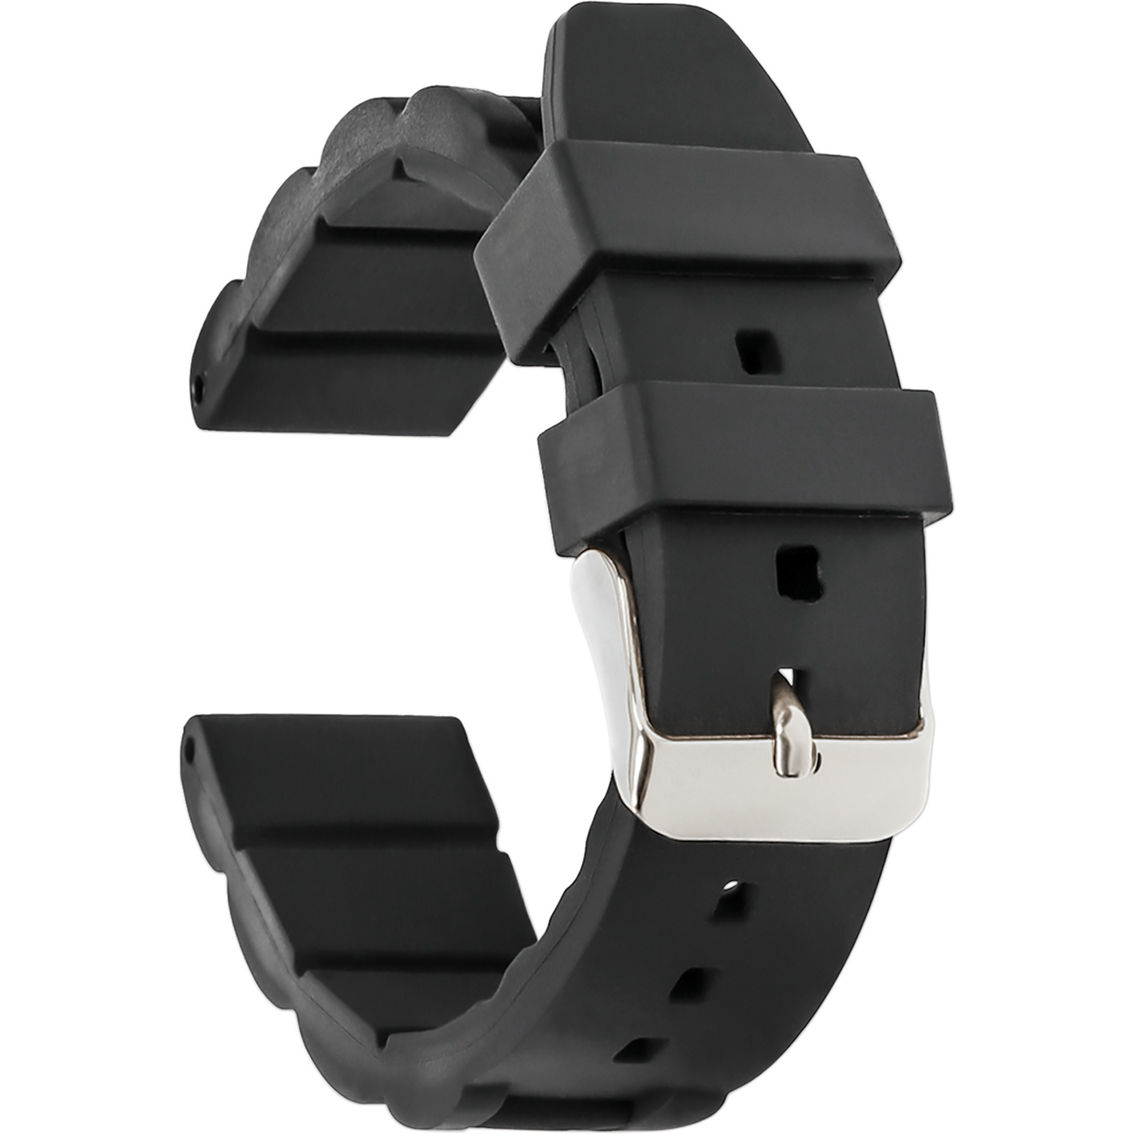 Debeer 26mm Black Link Style Silicone Rubber Stainless Steel Buckle Watch Band - Image 4 of 4